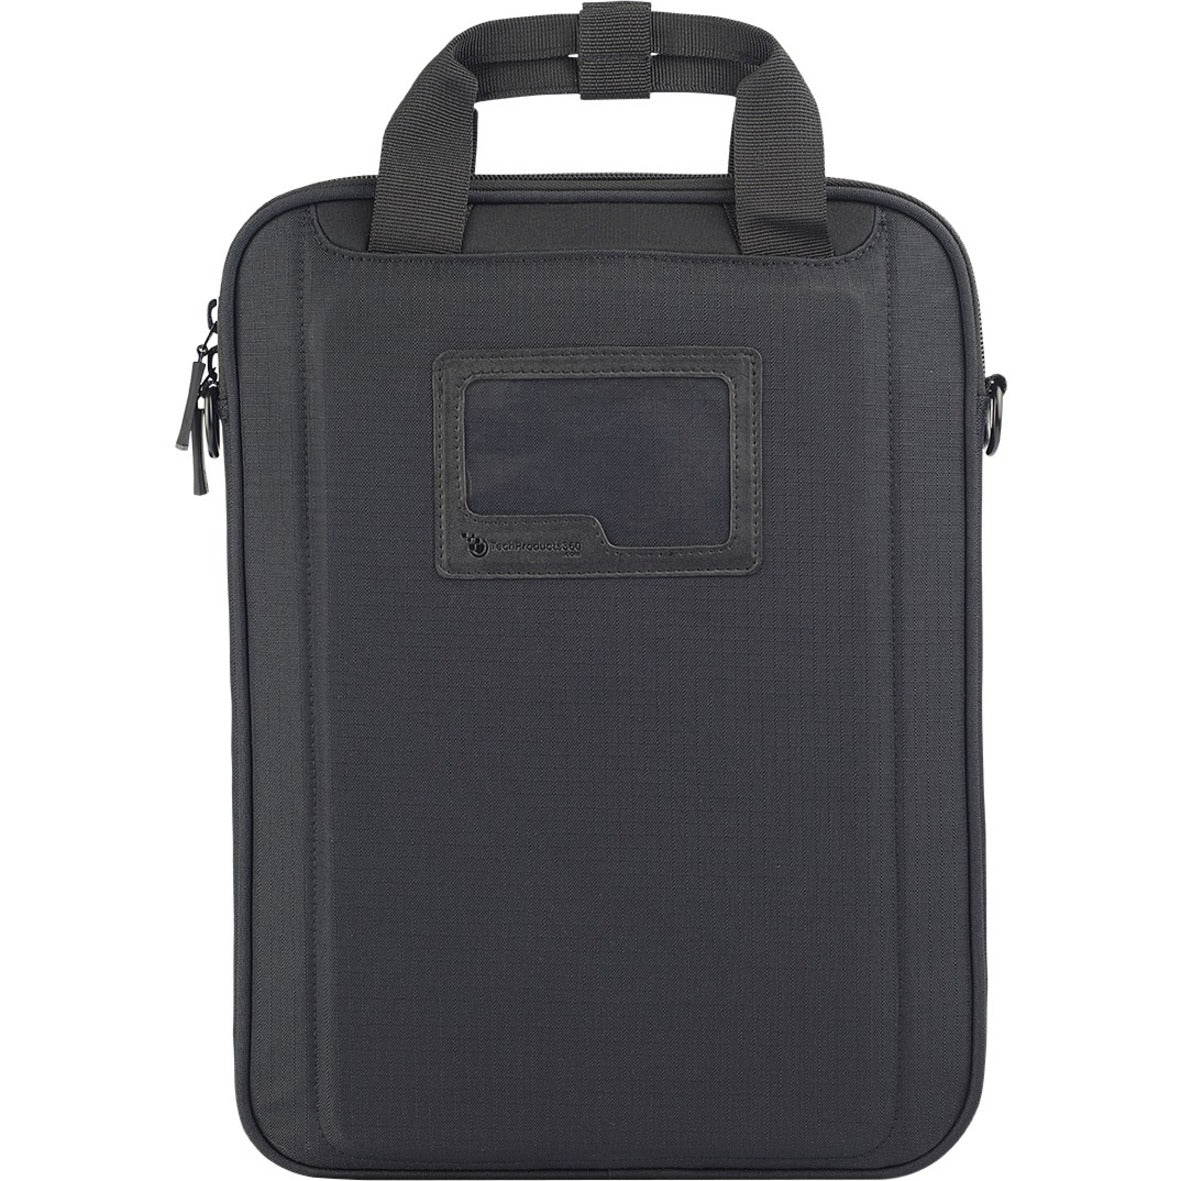 TechProducts360 Carrying Case for 11" Notebook - Black